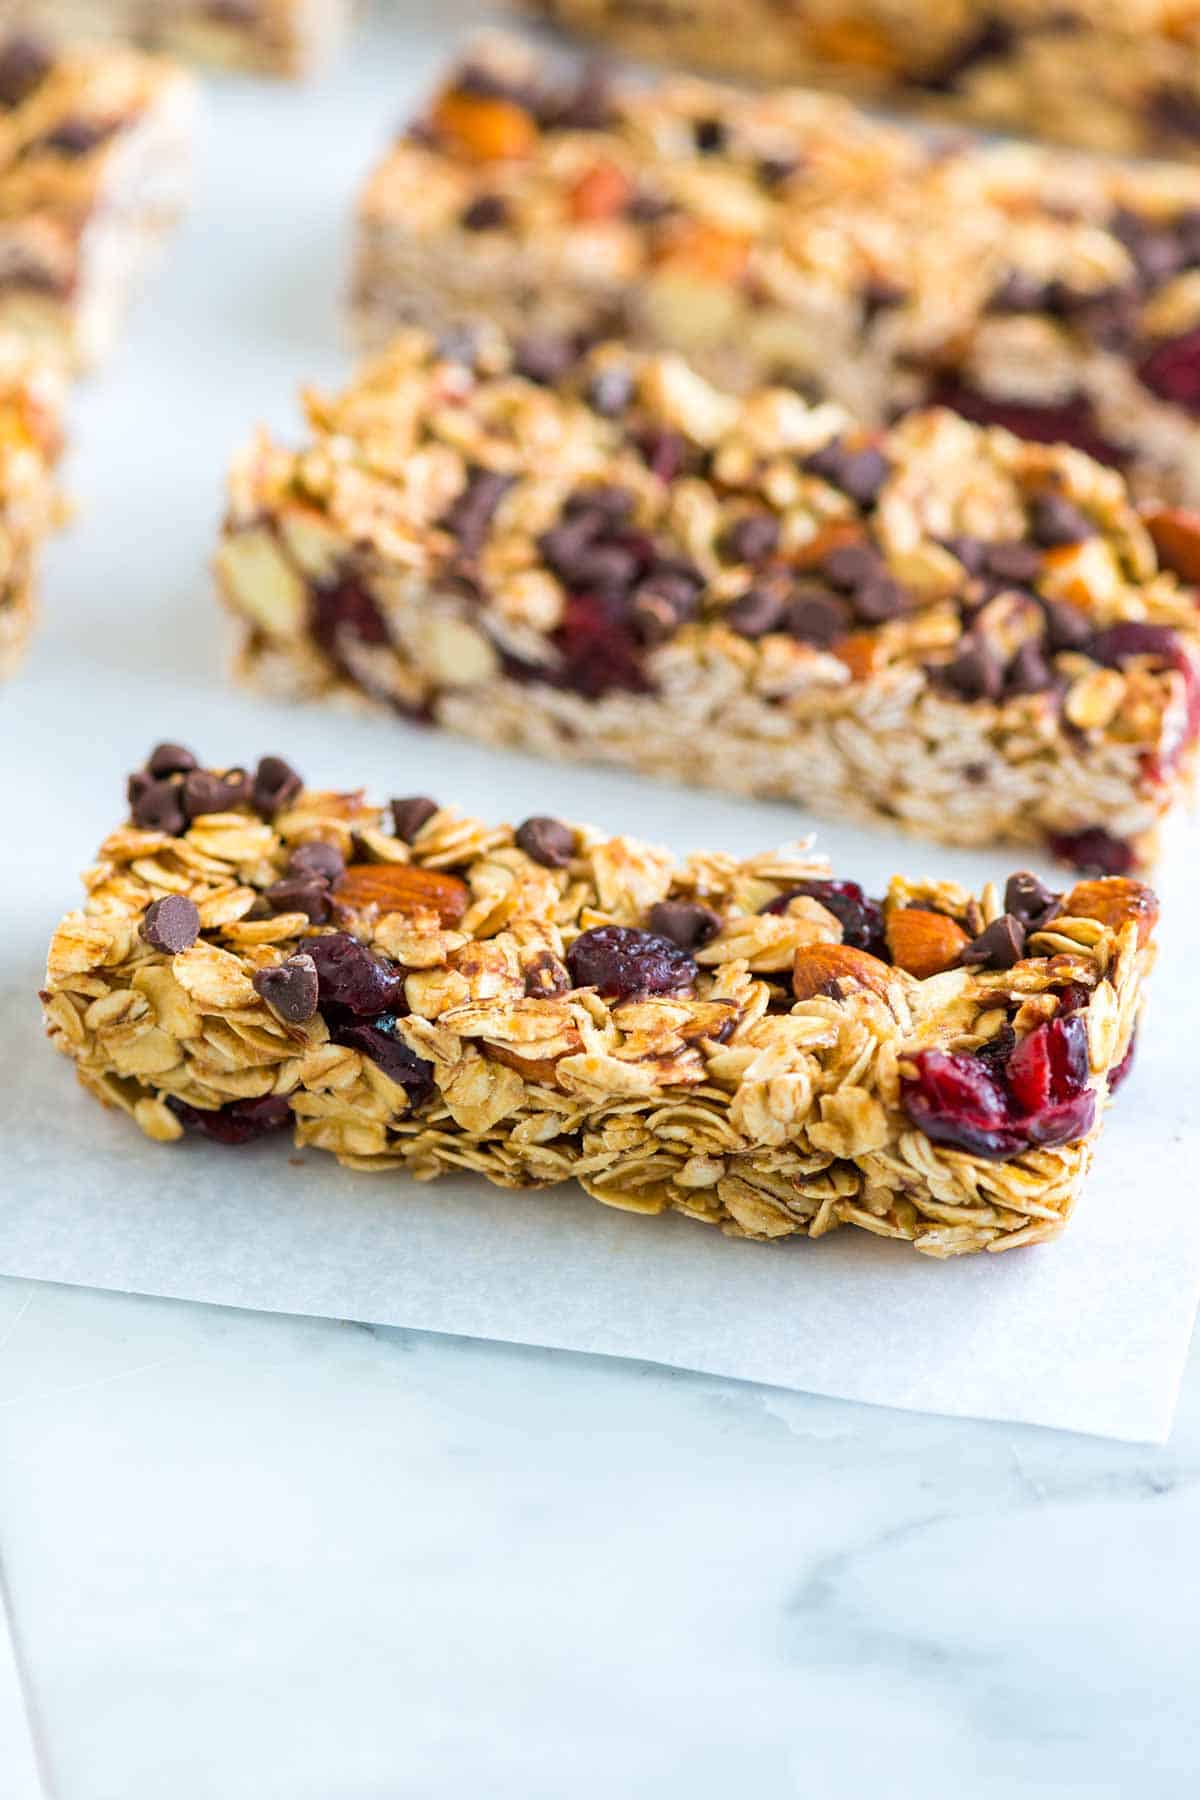 Granola Bars with Almond, Chocolate Chips and Dried Cranberries